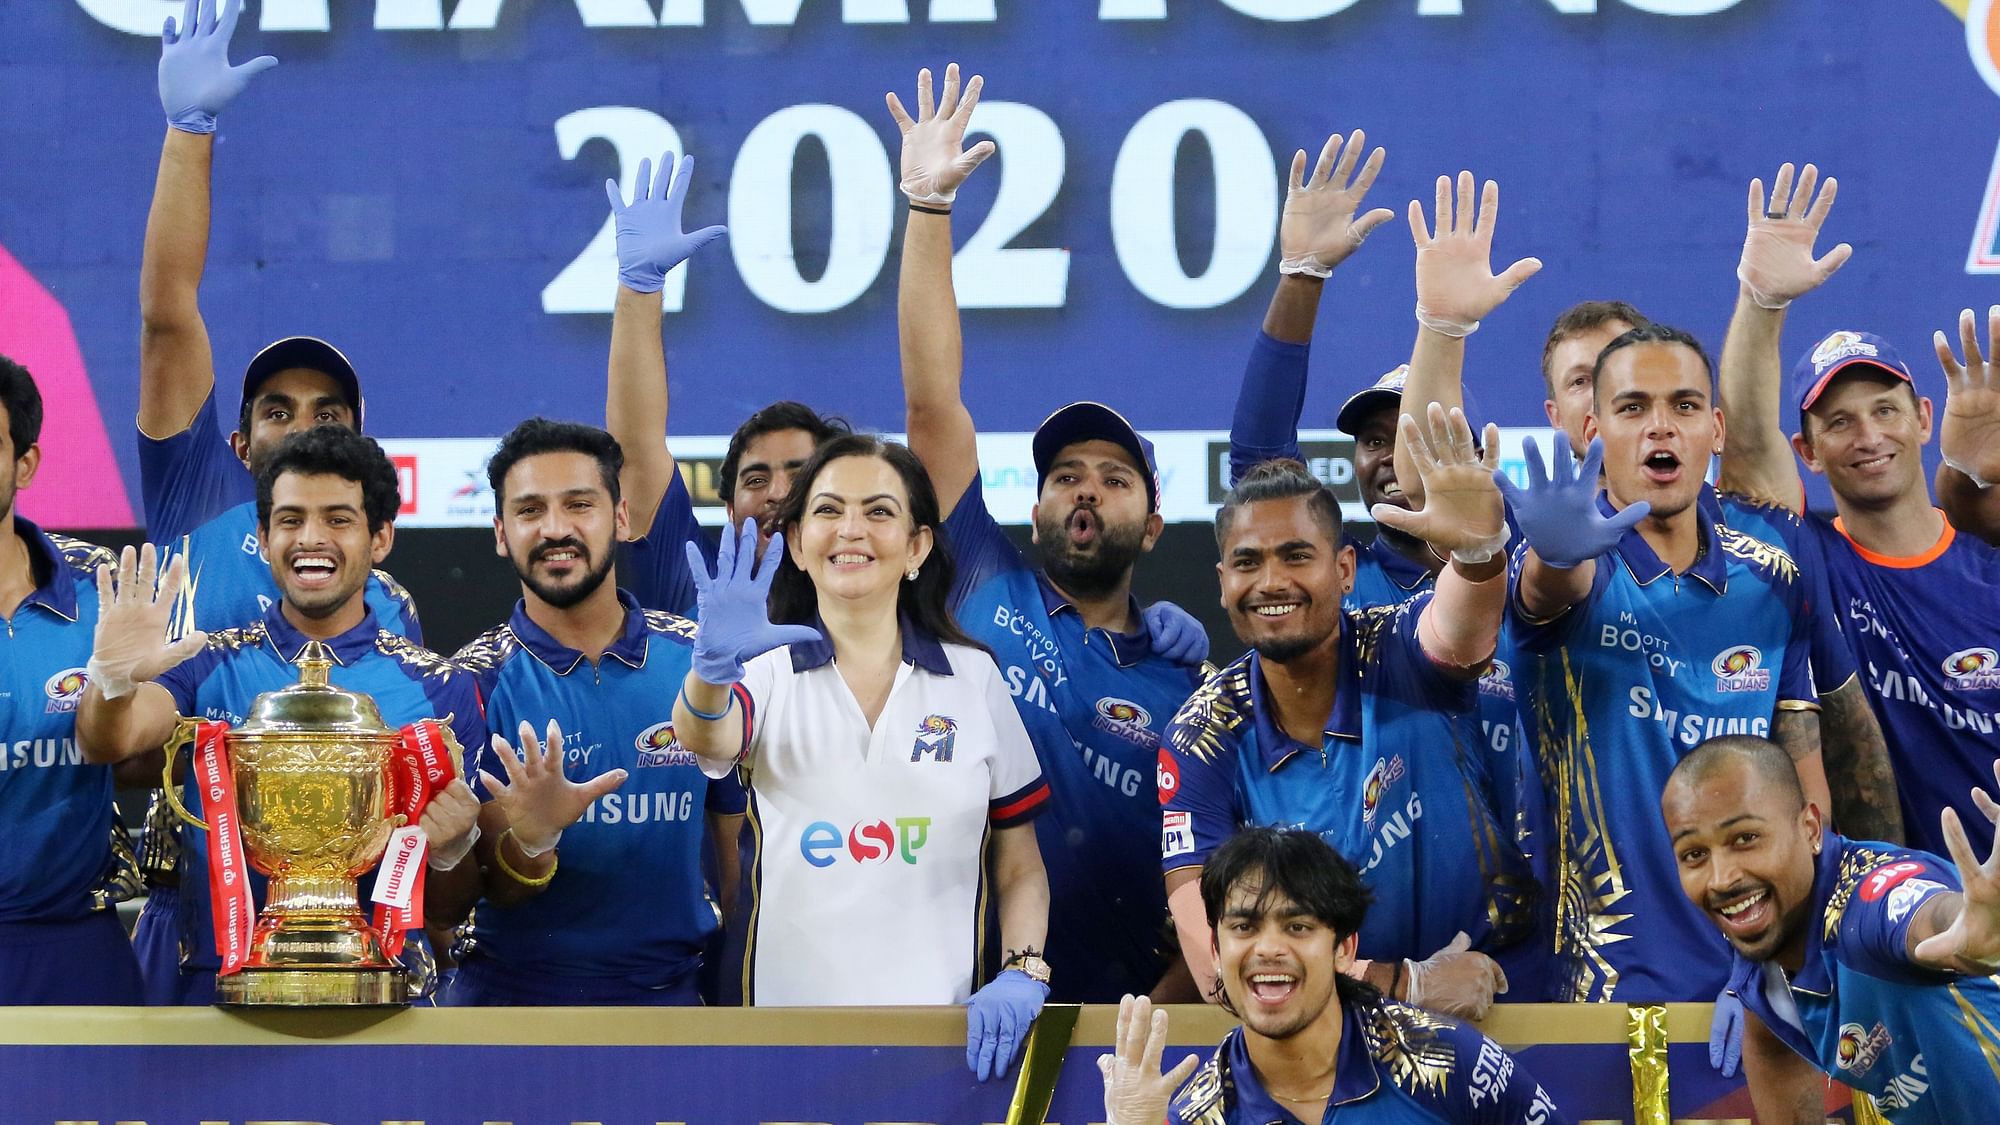 According to reports, Mumbai and Ahmedabad are likely to host the Indian Premier League (IPL) matches this season.